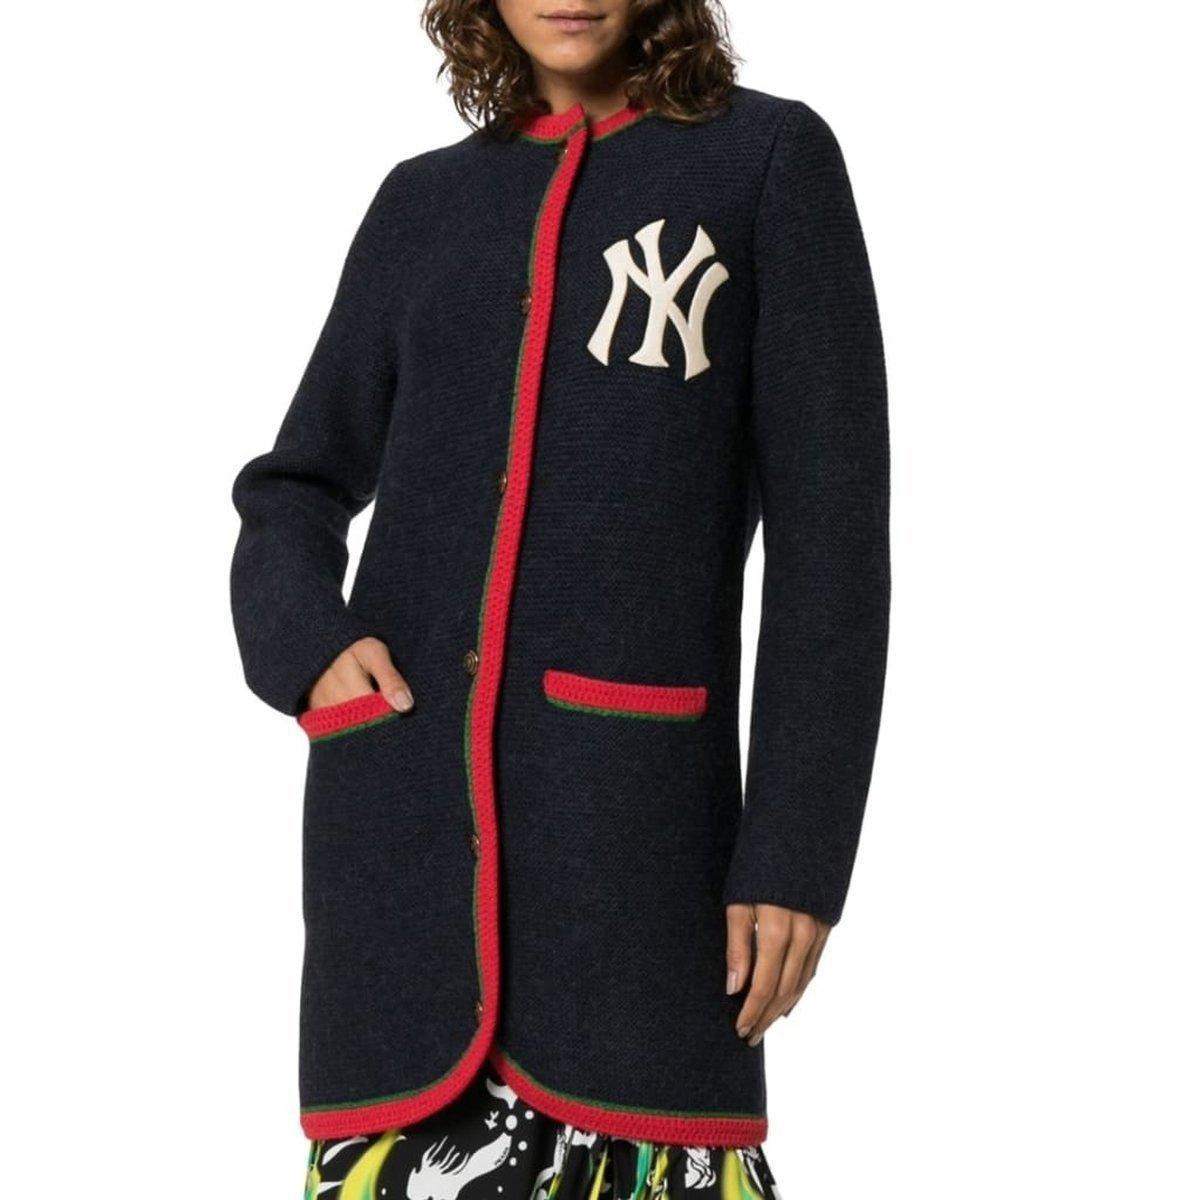 A long cardigan framed by a red and green knit trim.
The New York Yankees logo patch is on the front and a crystal embroidered Gucci patch on the back.
Navy alpaca wool blend.
Red and green knit trim.
Embroidered New York Yankees™ patch.
Crystal